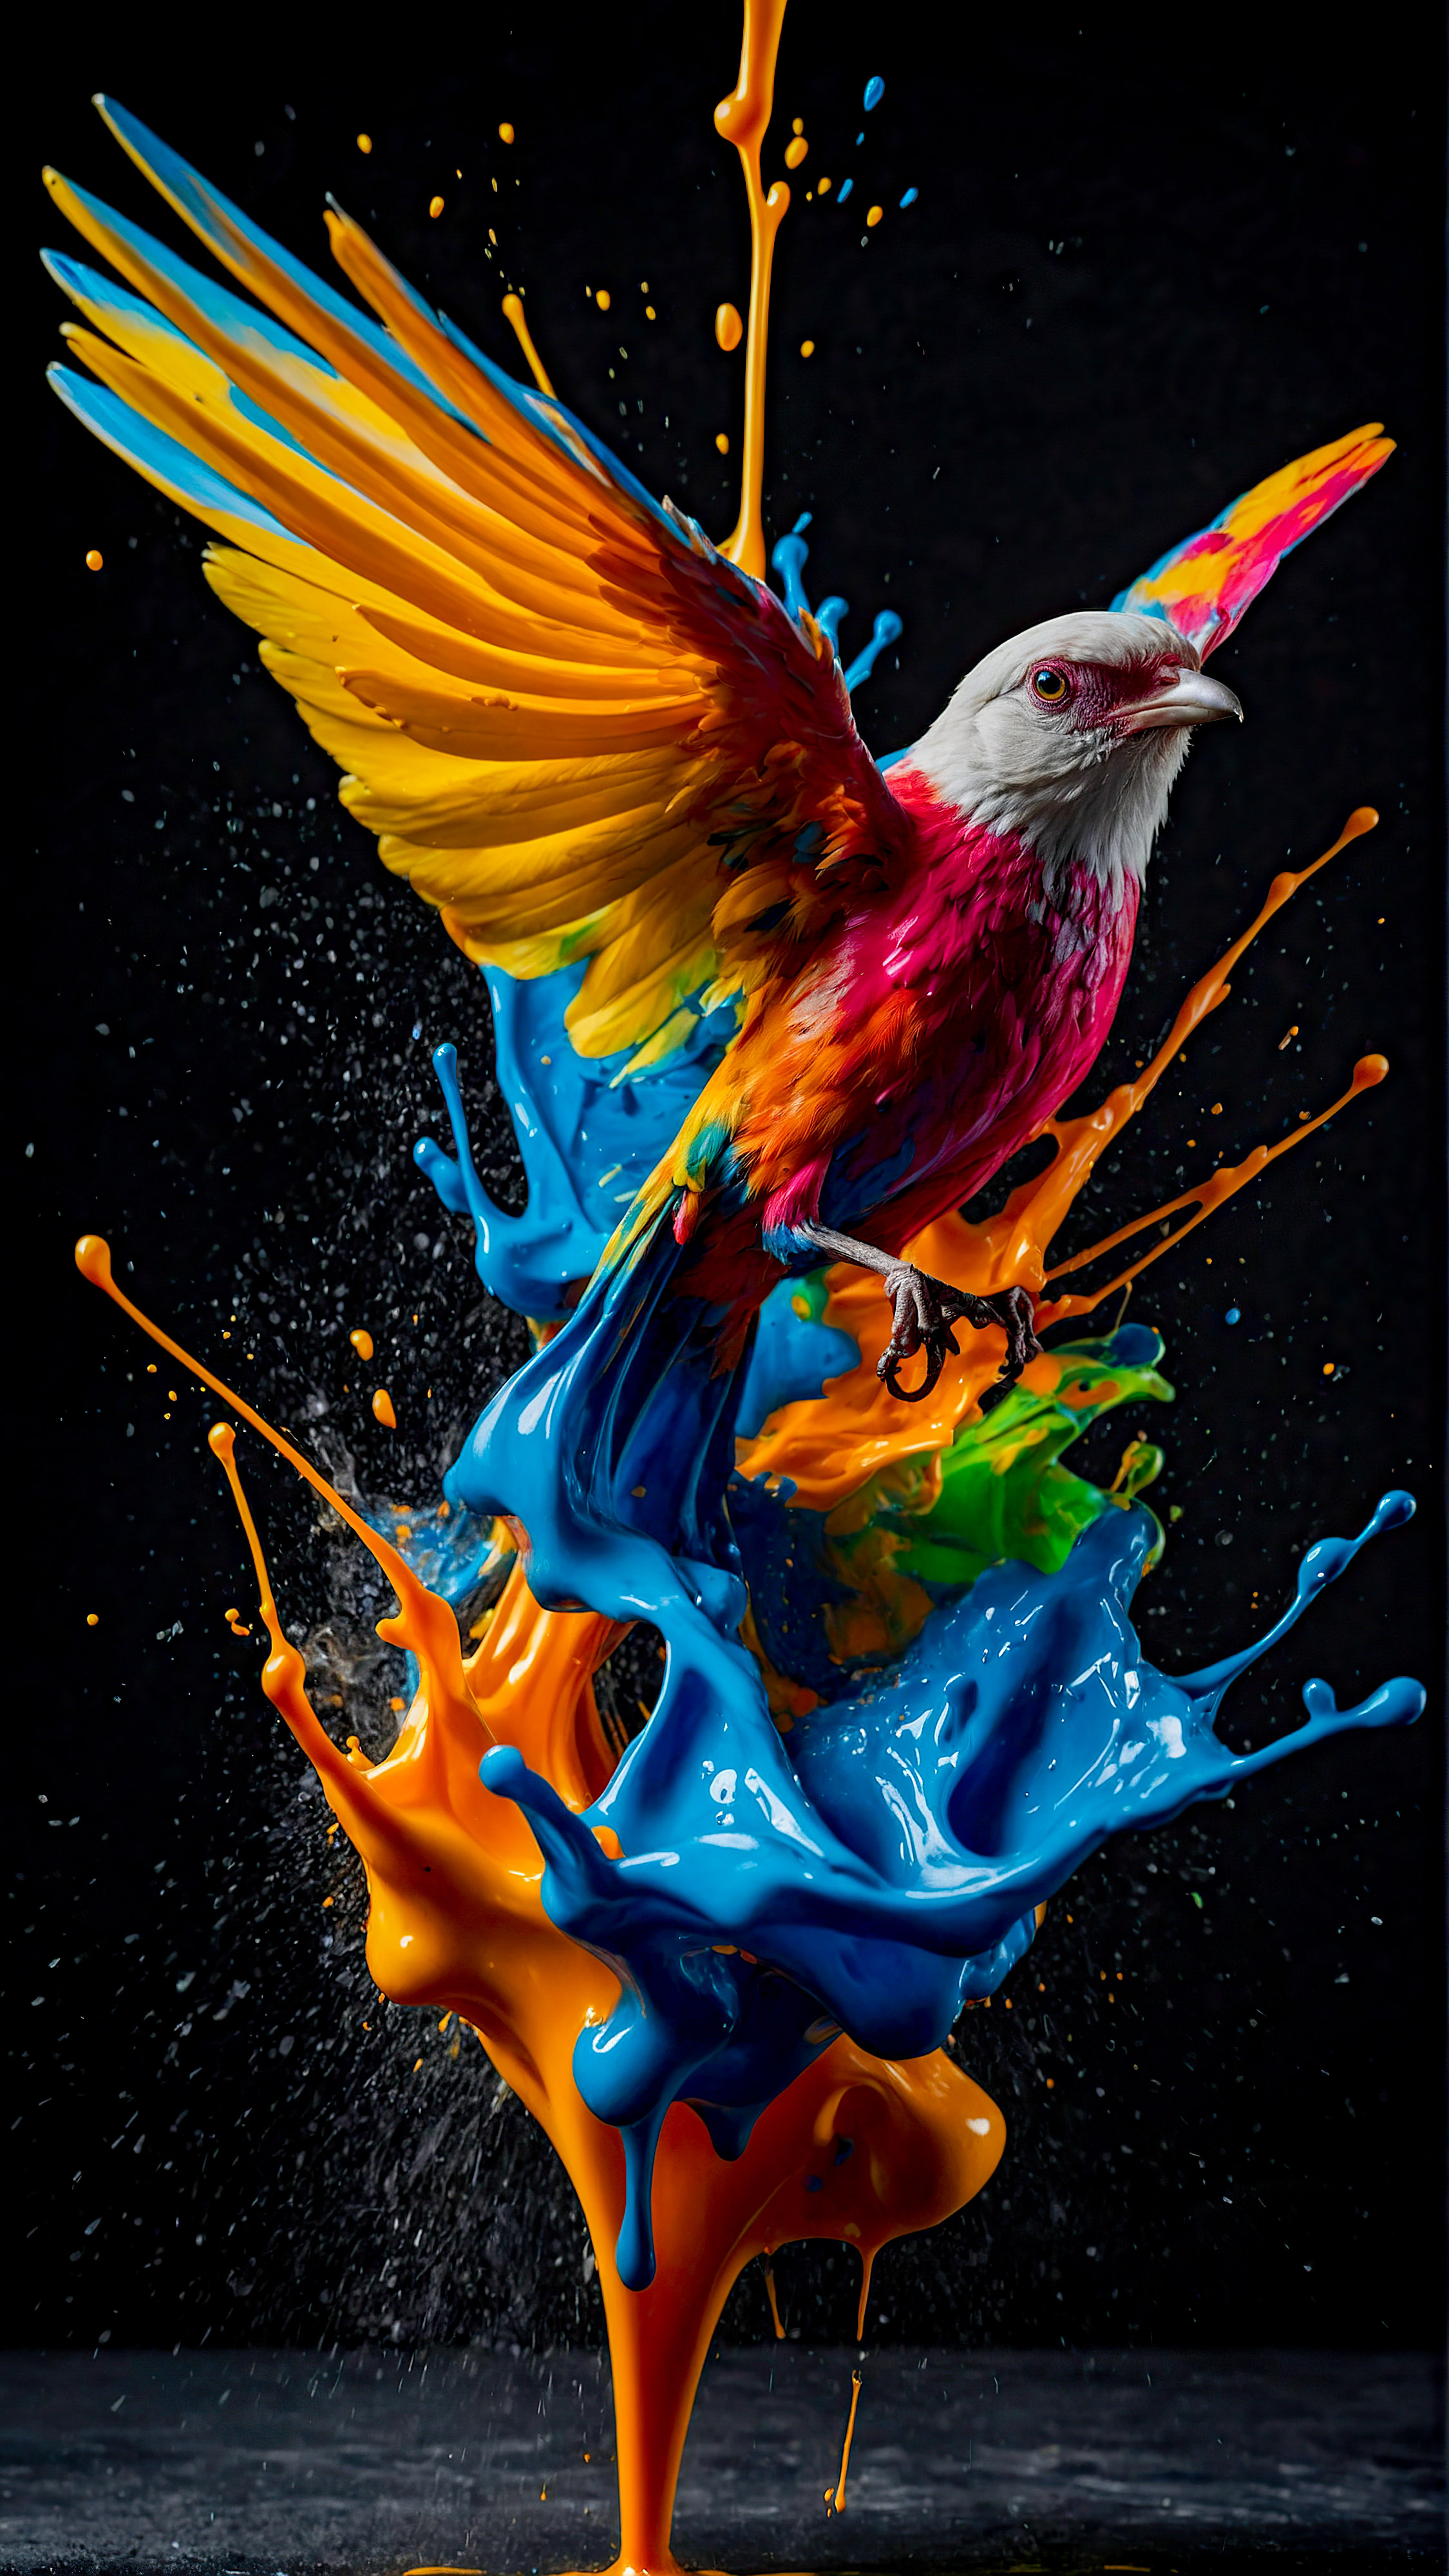 Discover the vibrancy of colors with our 4K iPhone wallpaper, showcasing a dynamic and colorful splash of paint, resembling a bird in flight, against a dark background.